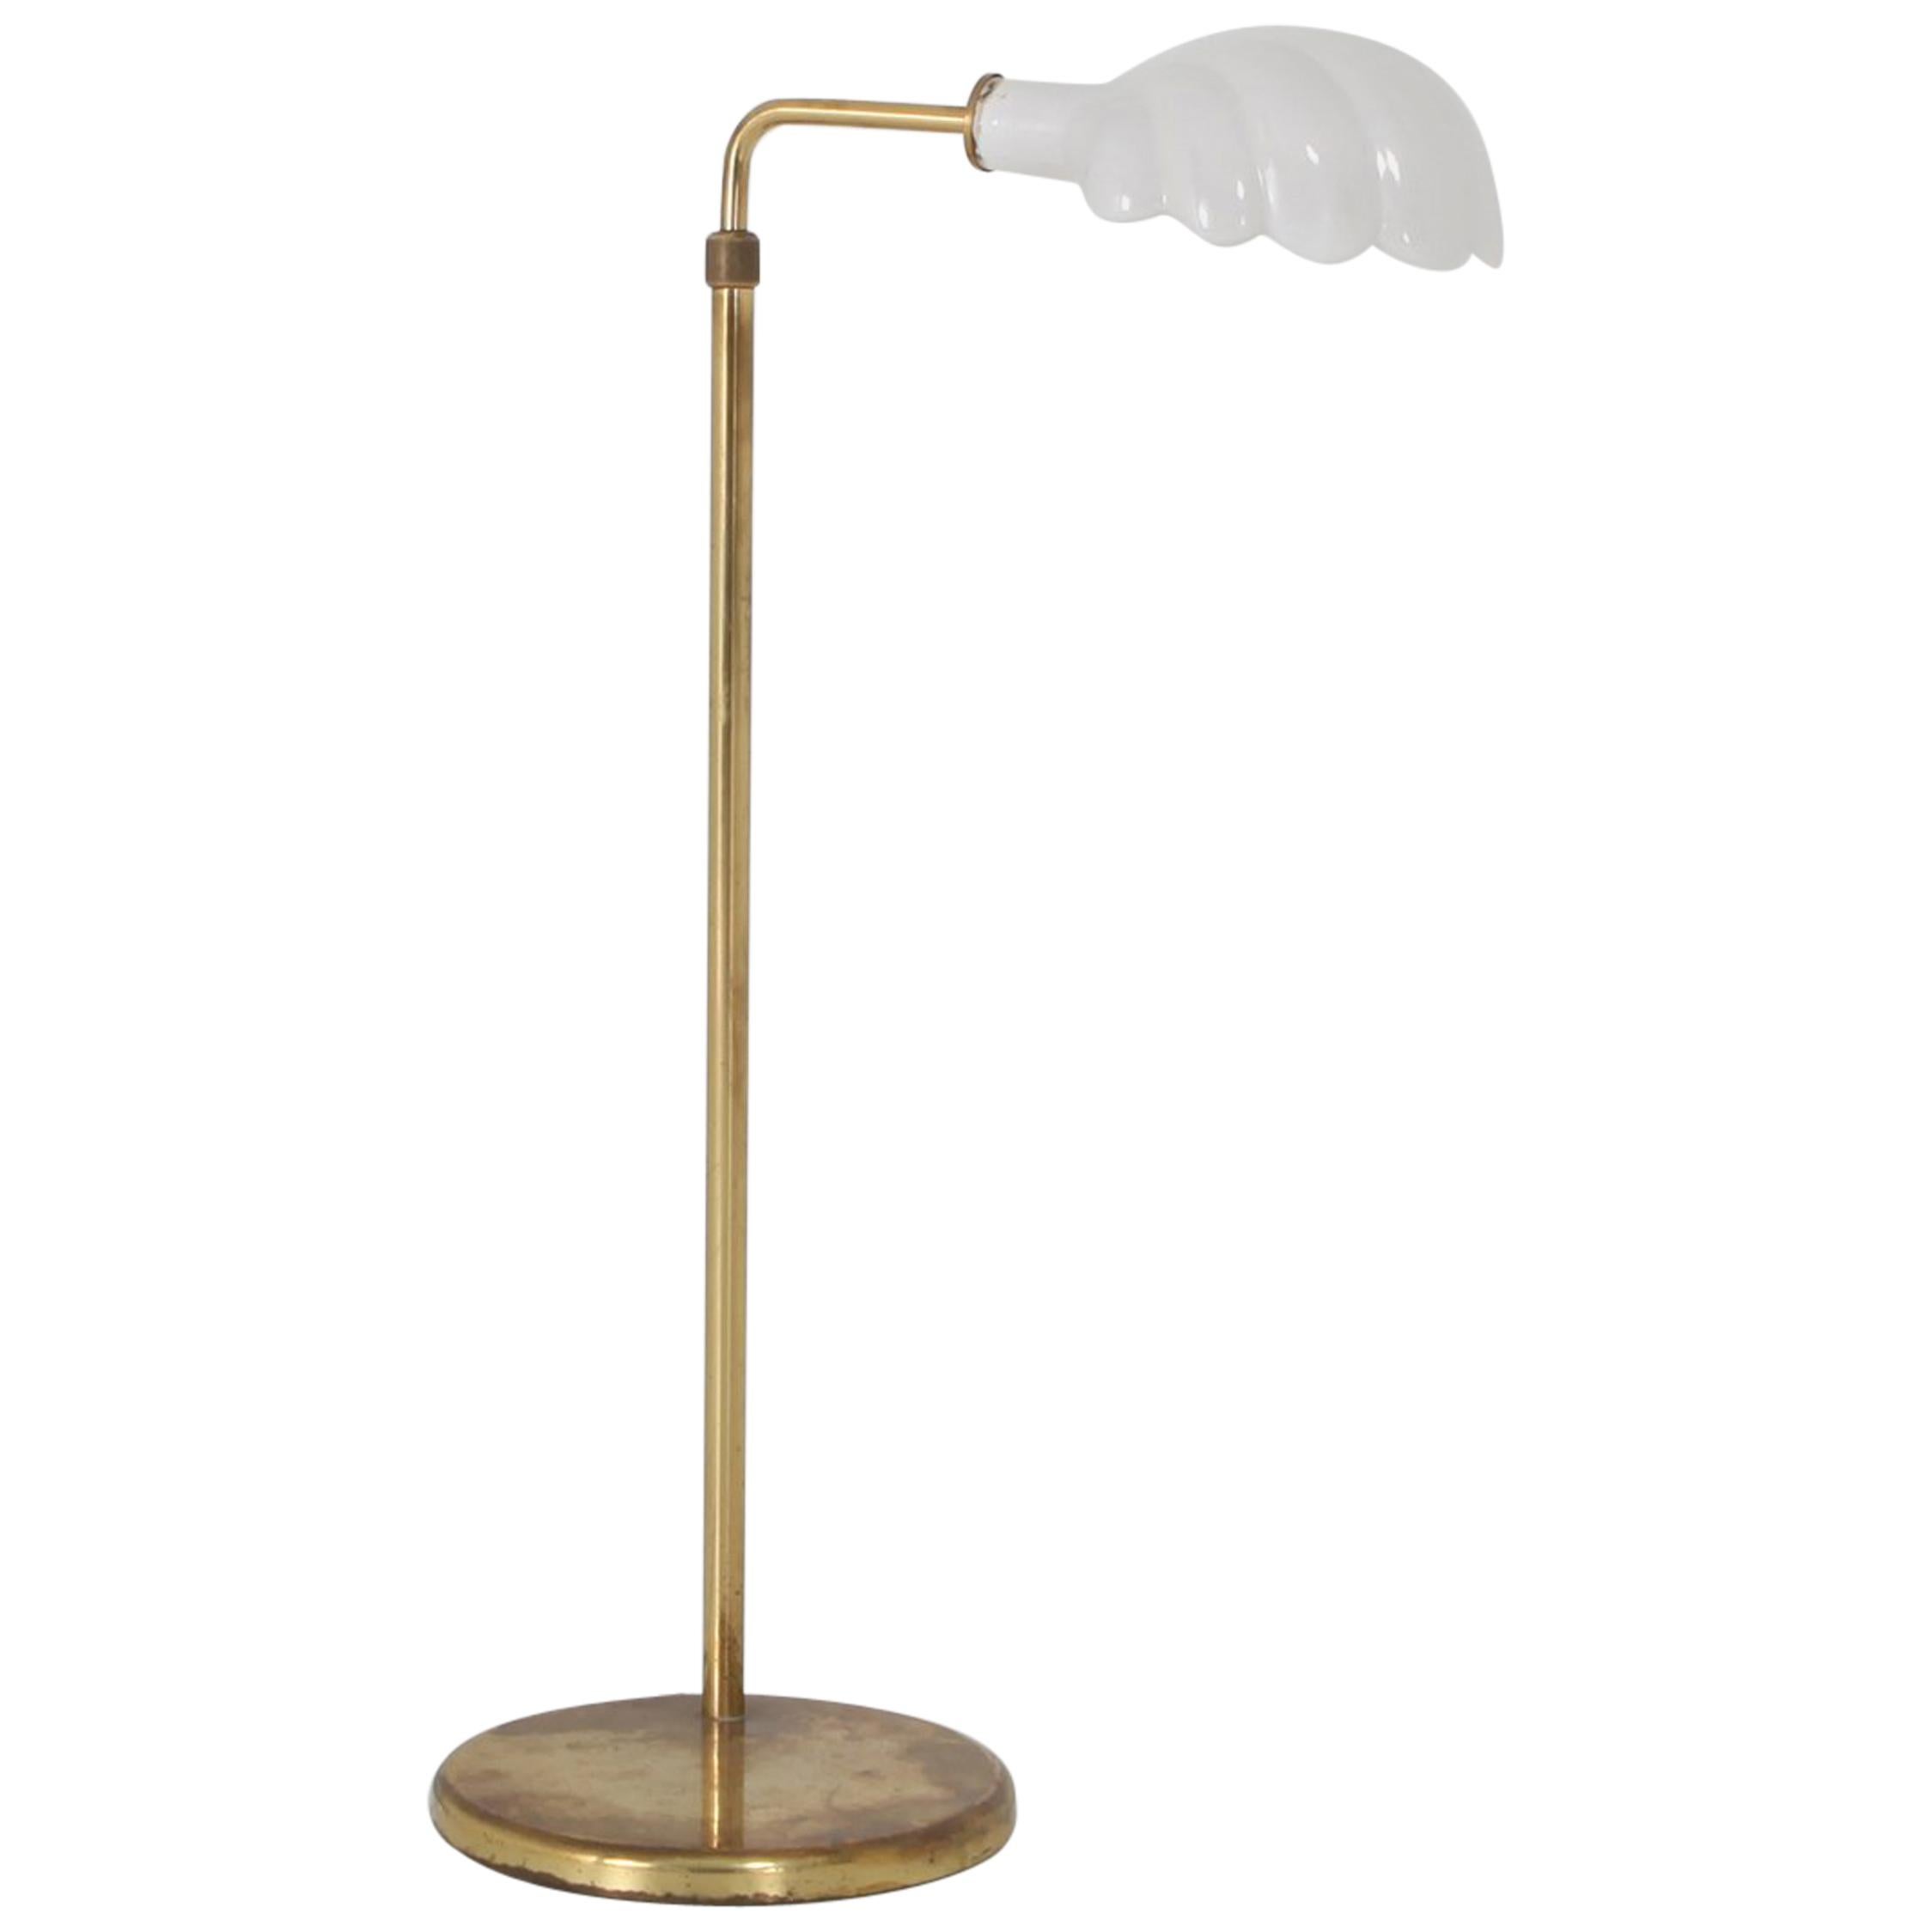 Brass and Porcelain Adjustable Angelo brotto Floor Lamp